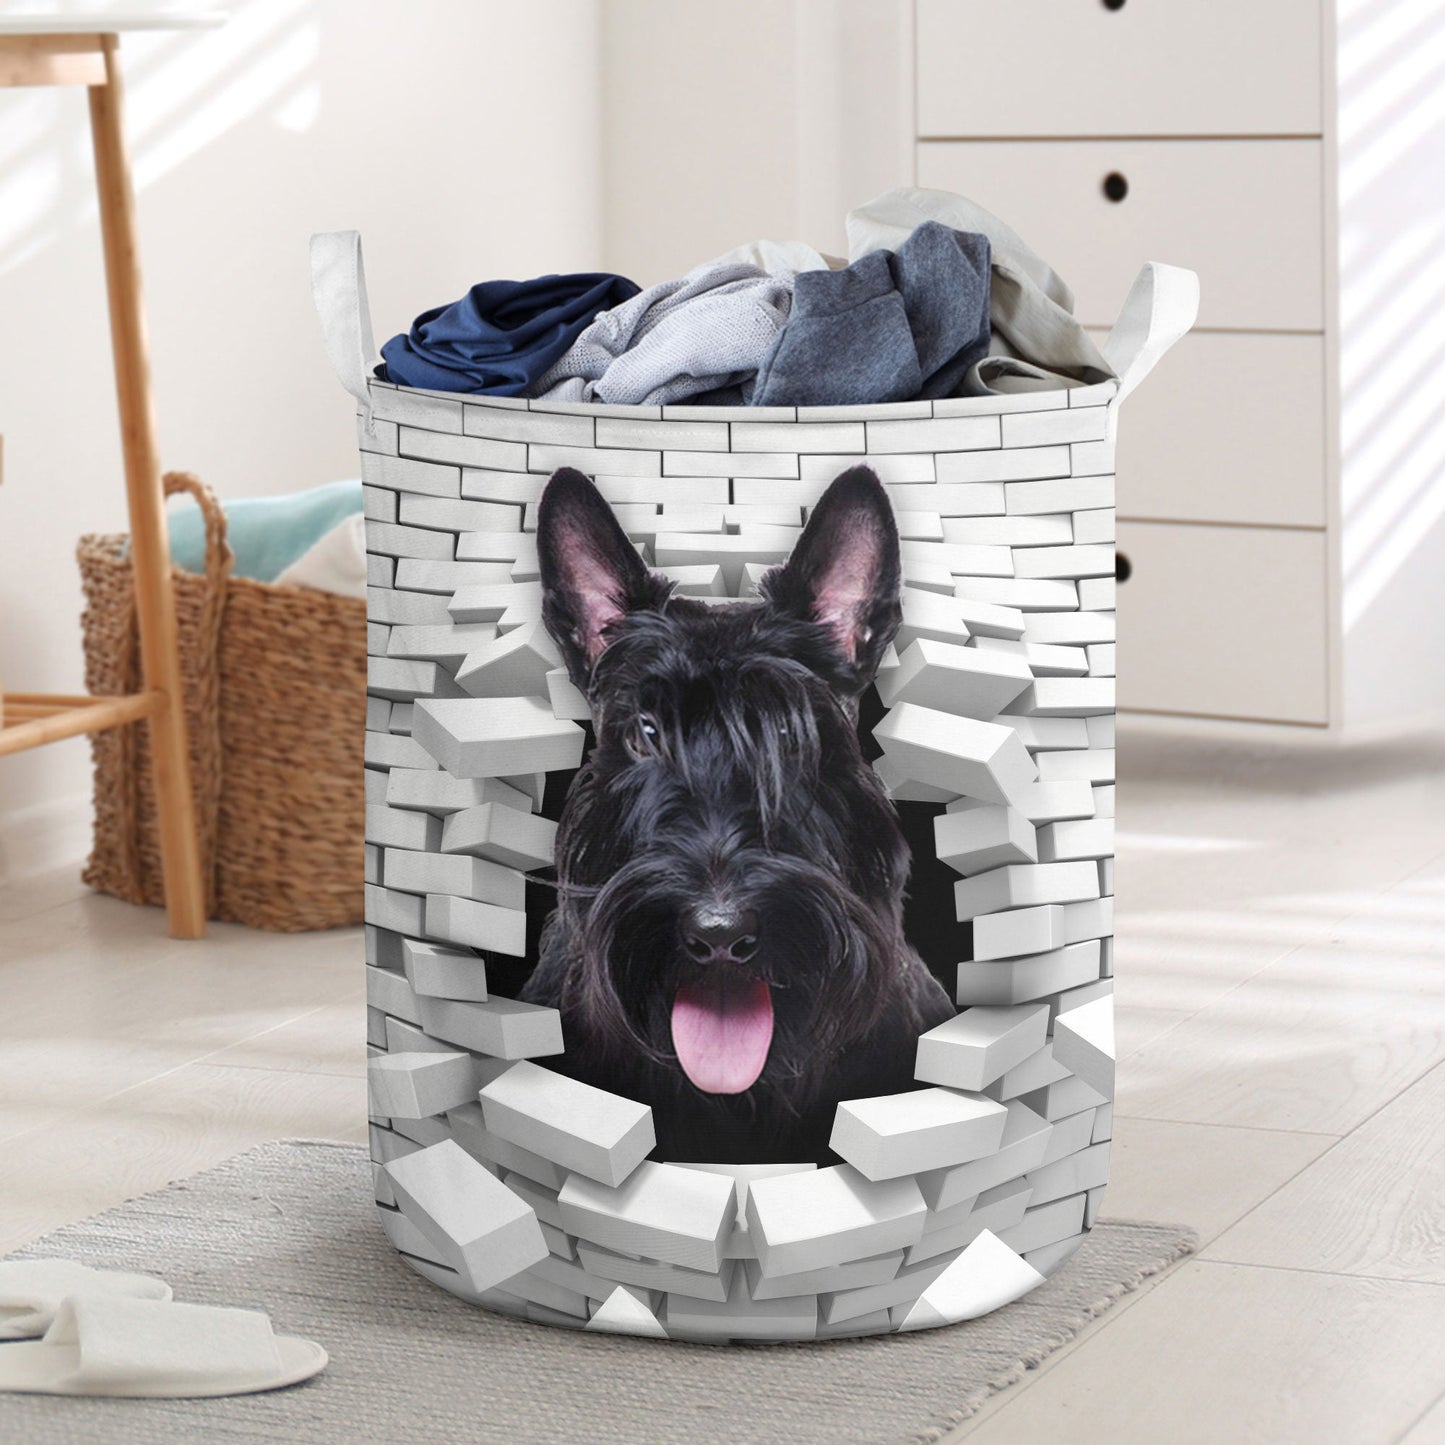 Scottish Terrier - In The Hole Of Wall Pattern Laundry Basket